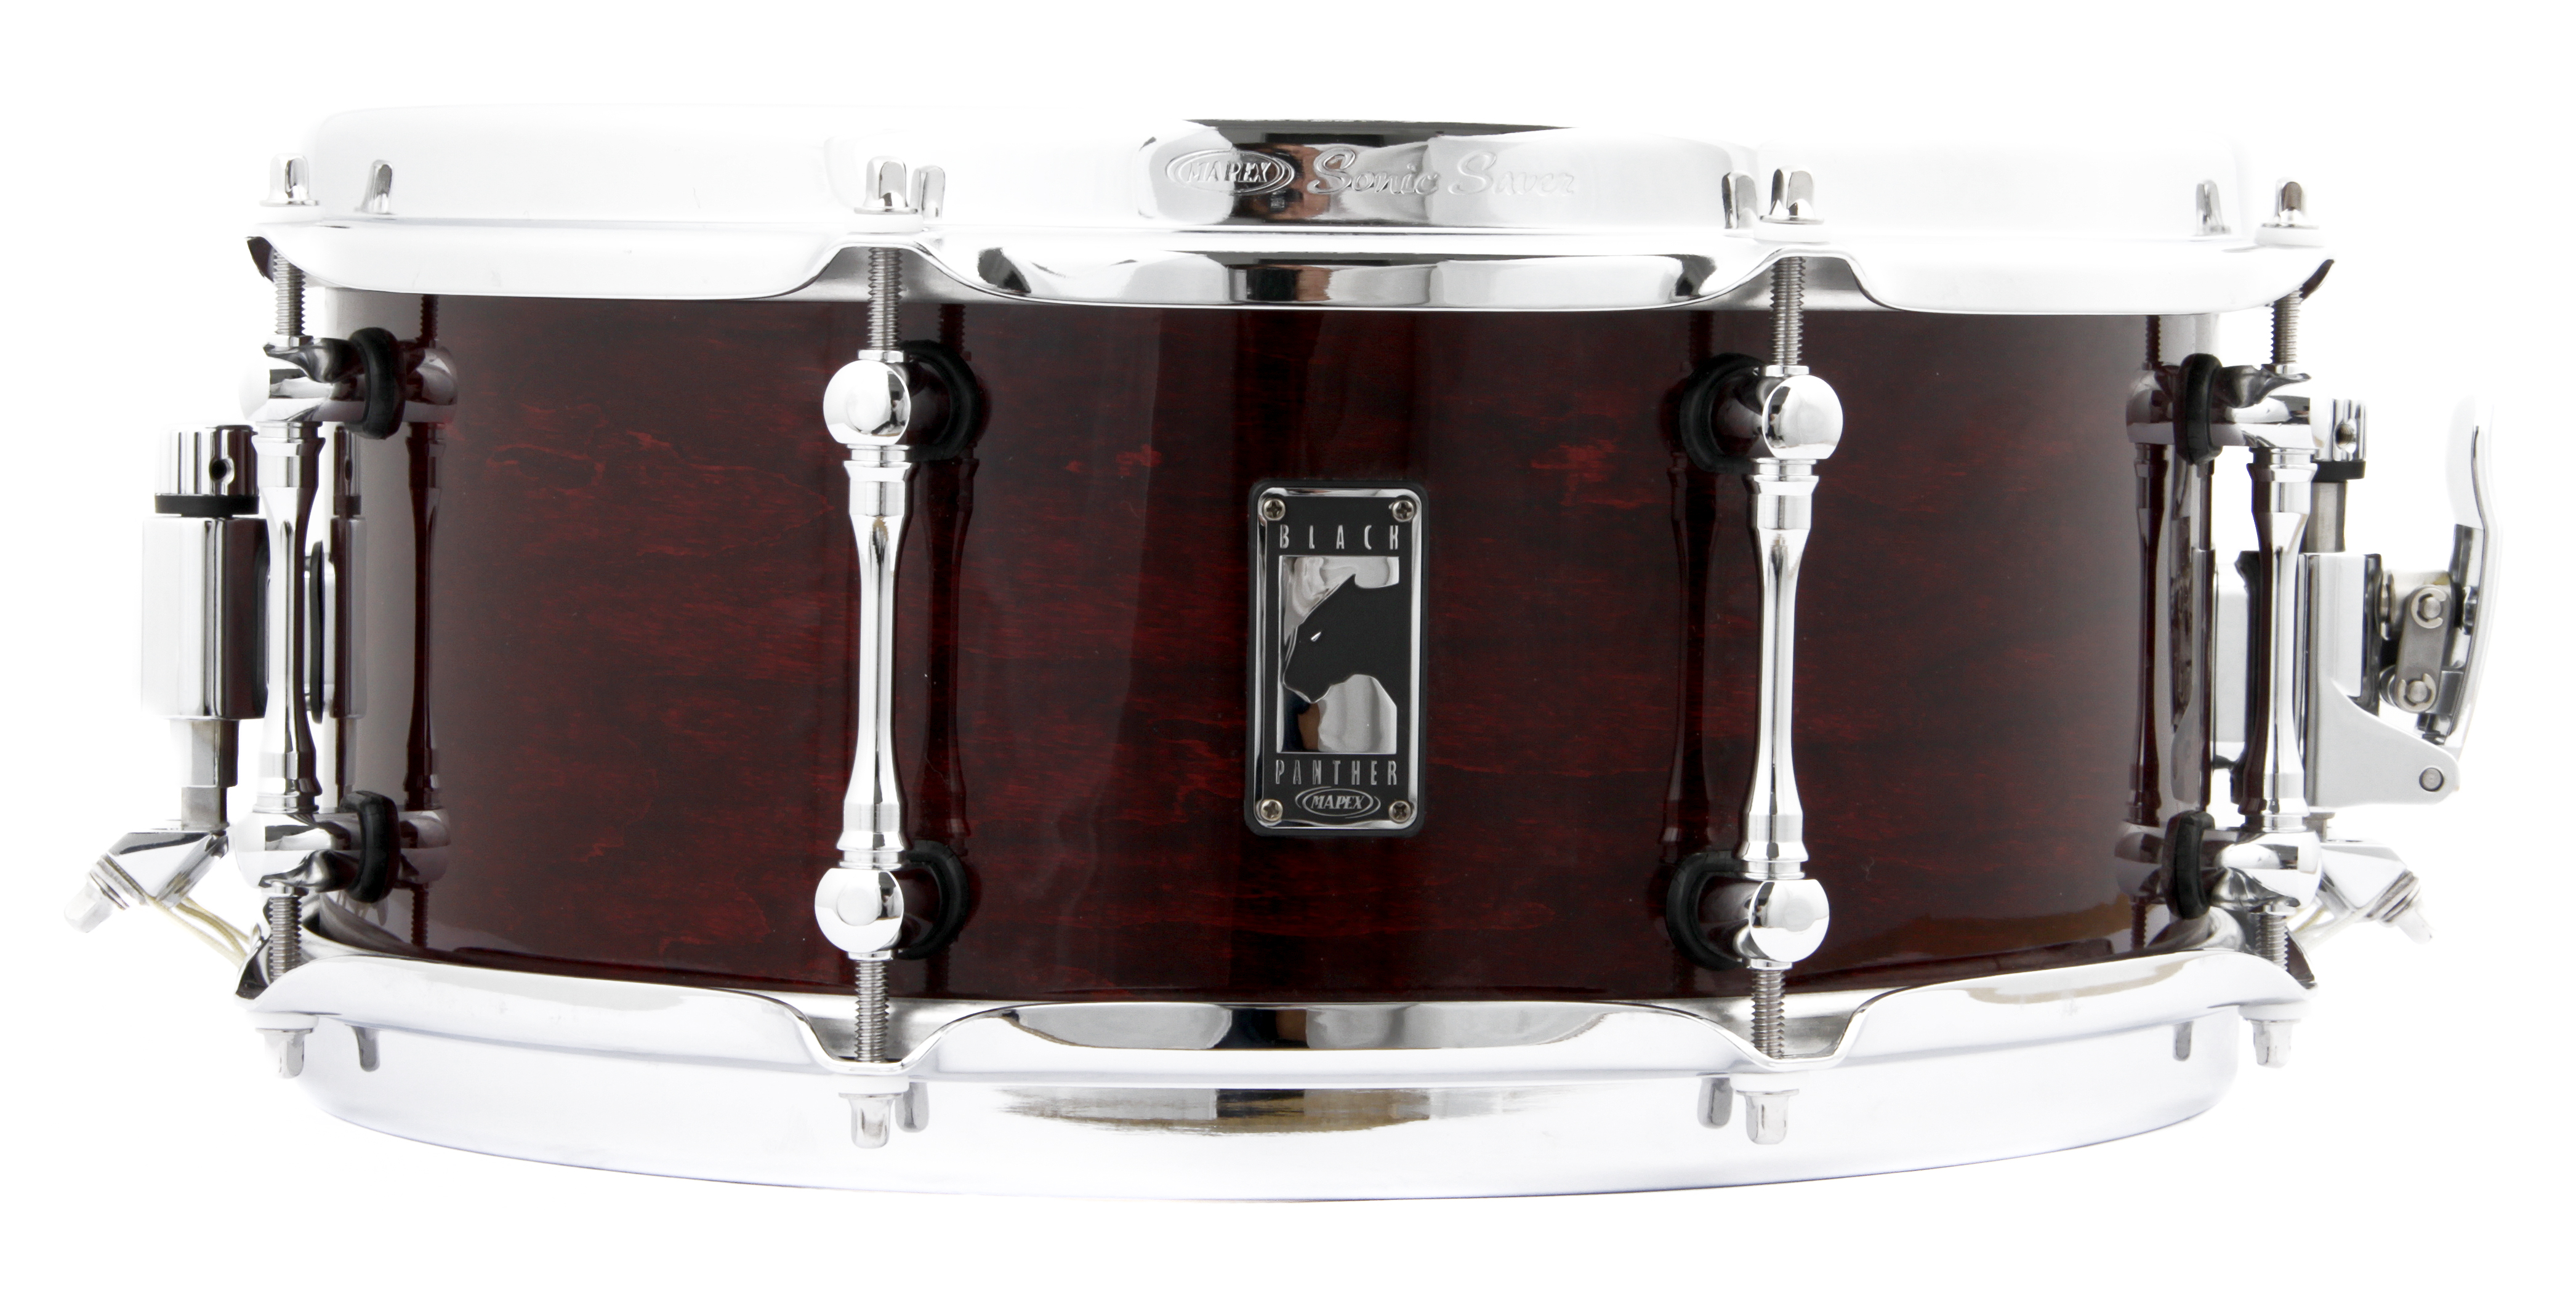 Black Panther Cherry Bomb 13x5,5 Snare